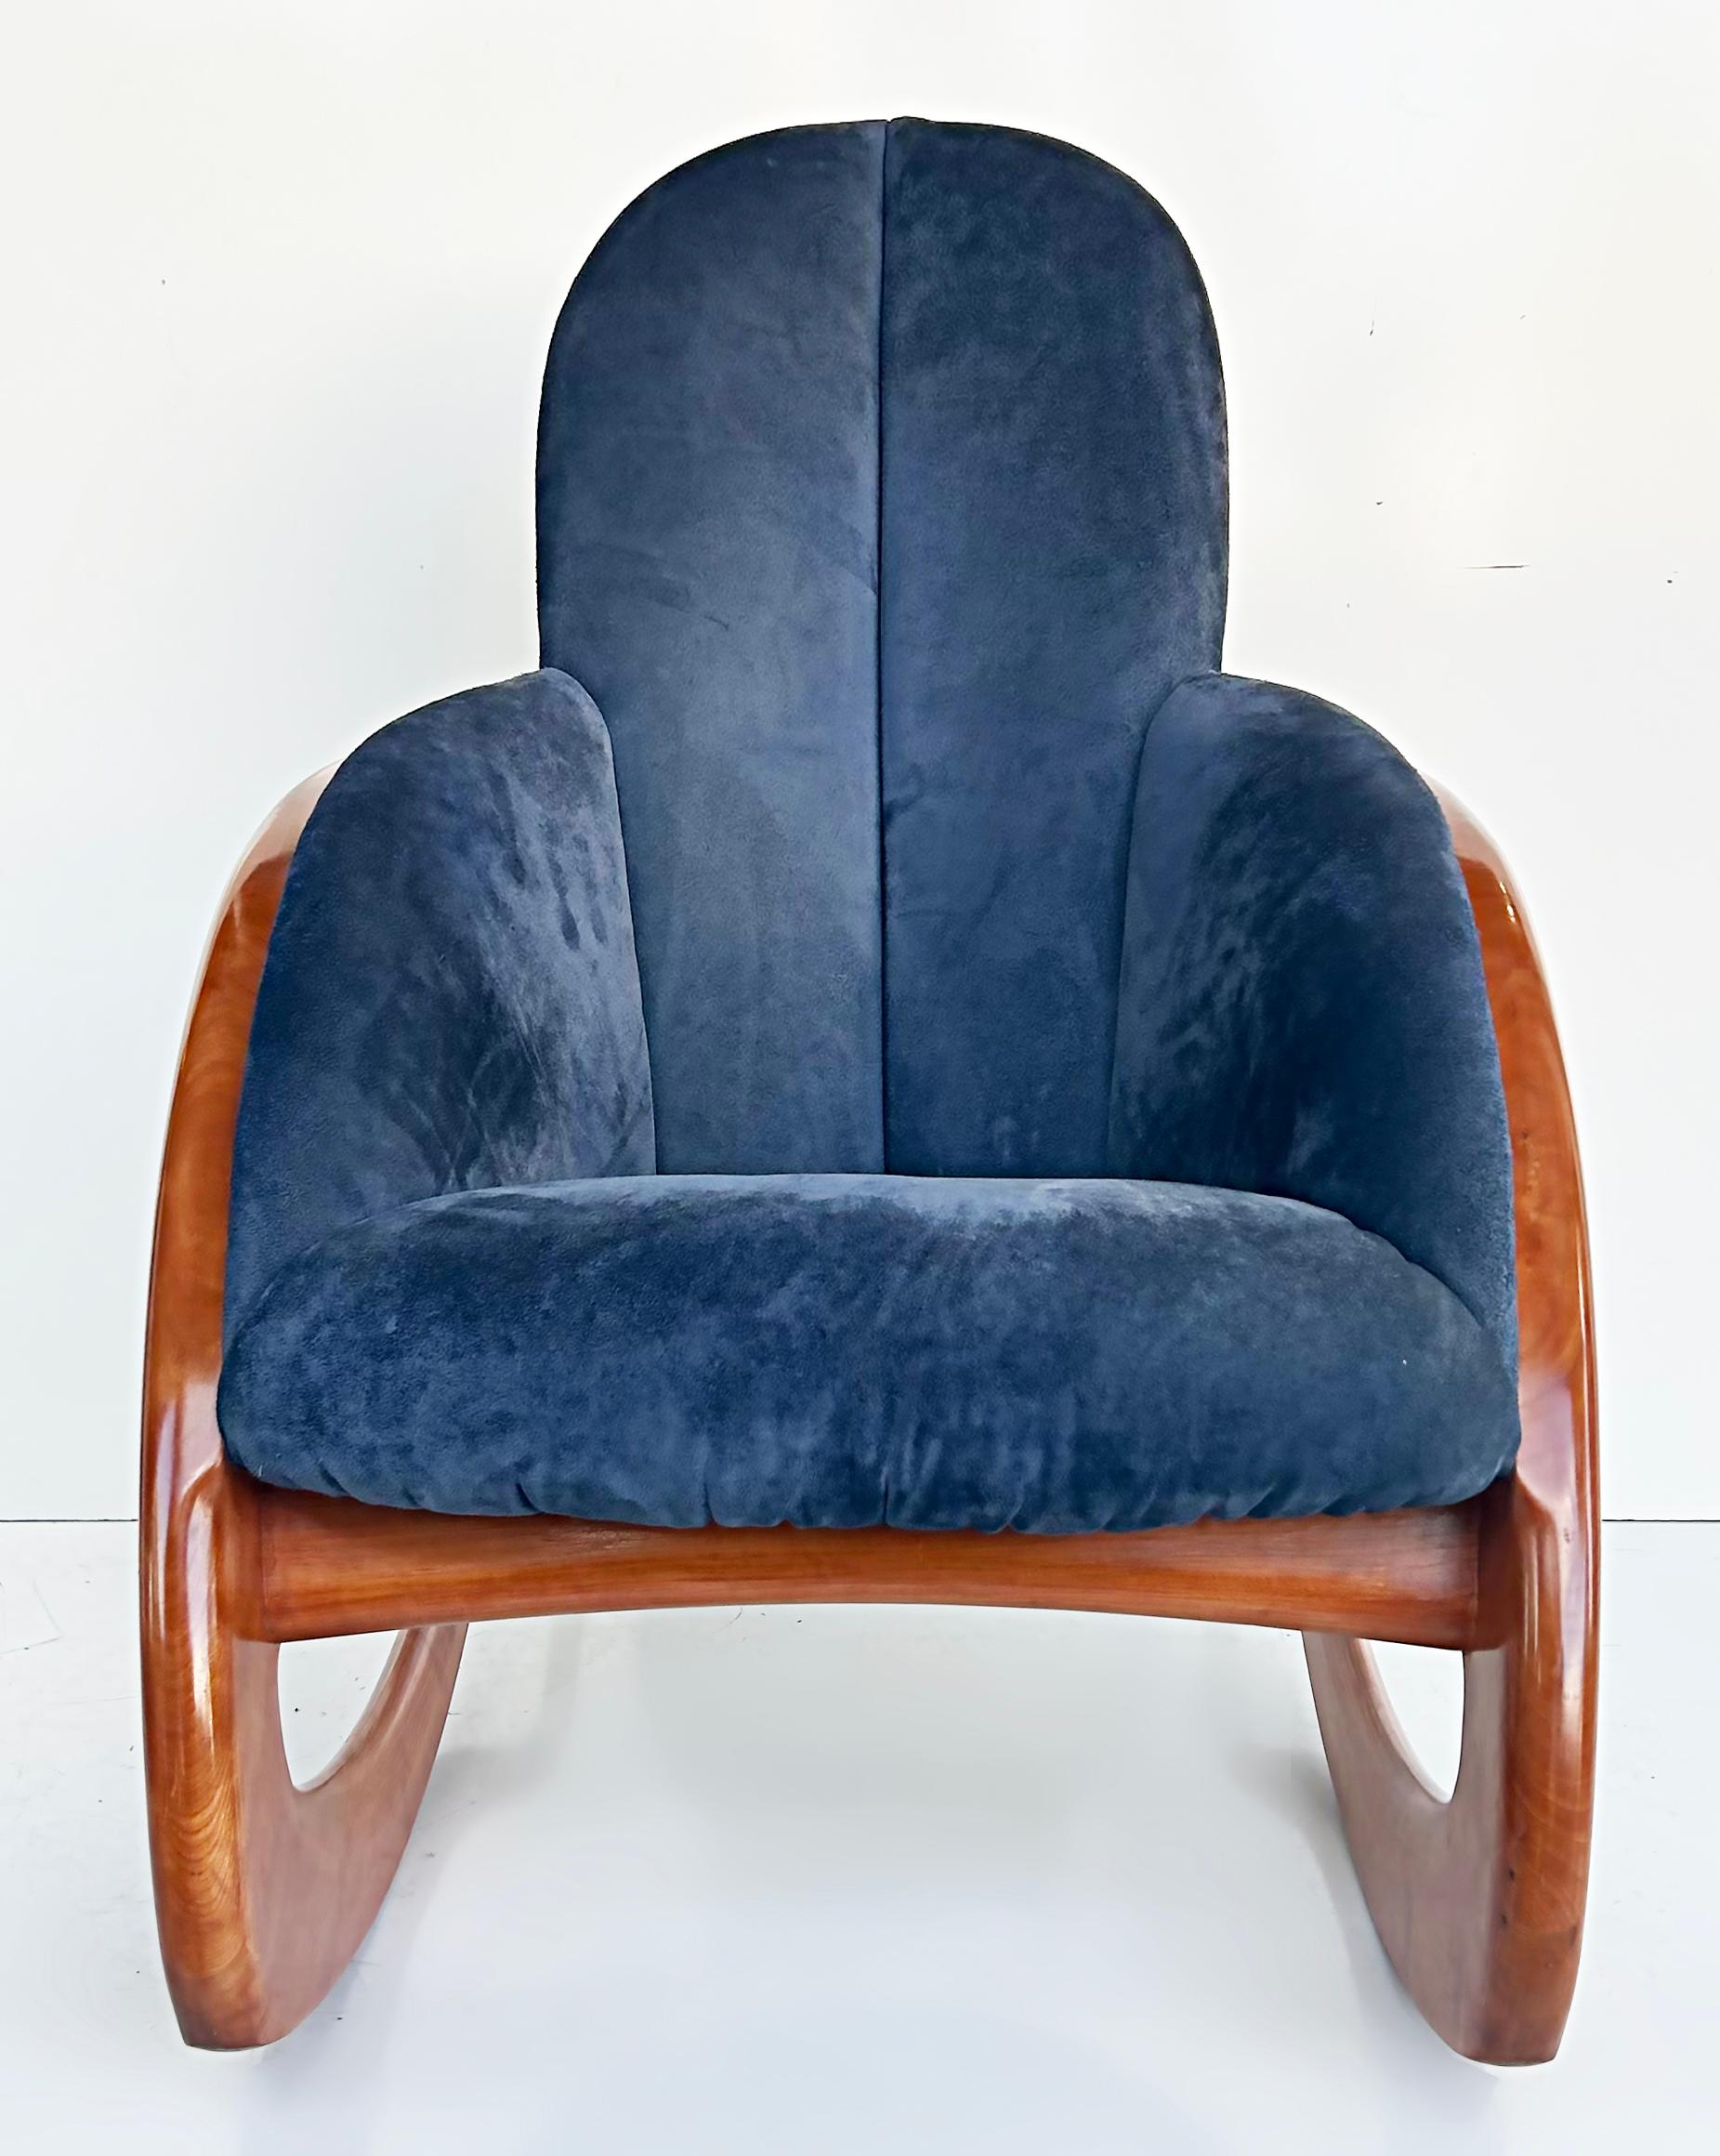 Wendell Castle crescent moon wood and suede rocking chair.

Offered for sale is a Wendell Castle ( 1932–2018) 